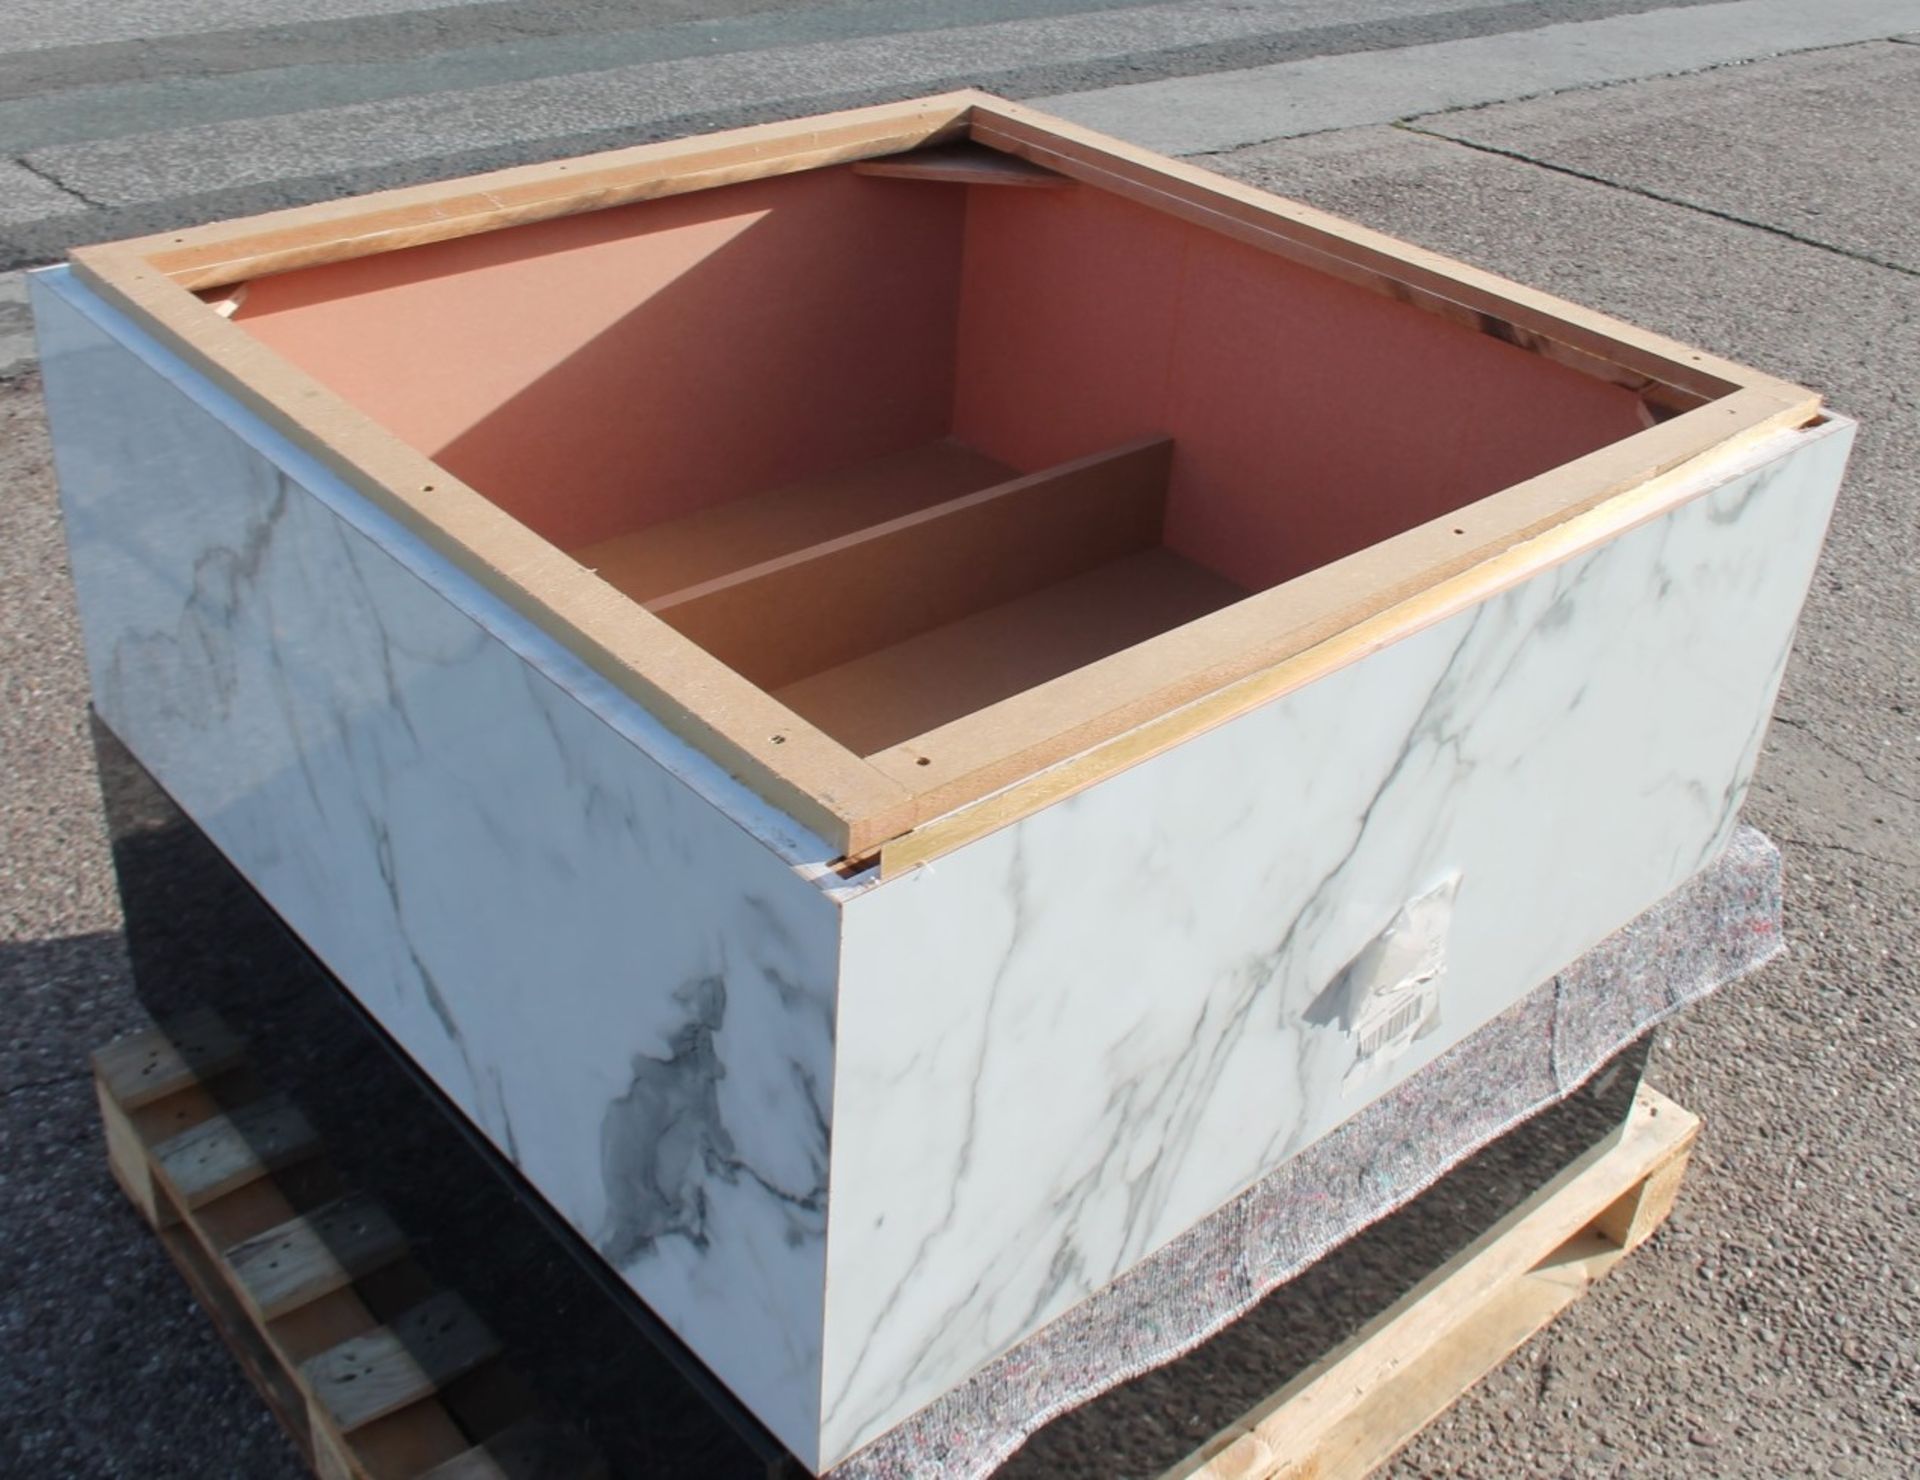 4 x Assorted 1-Metre Wide Wooden Retail Plinth Platforms, All With A Marble-effect Aesthetic - Image 5 of 10